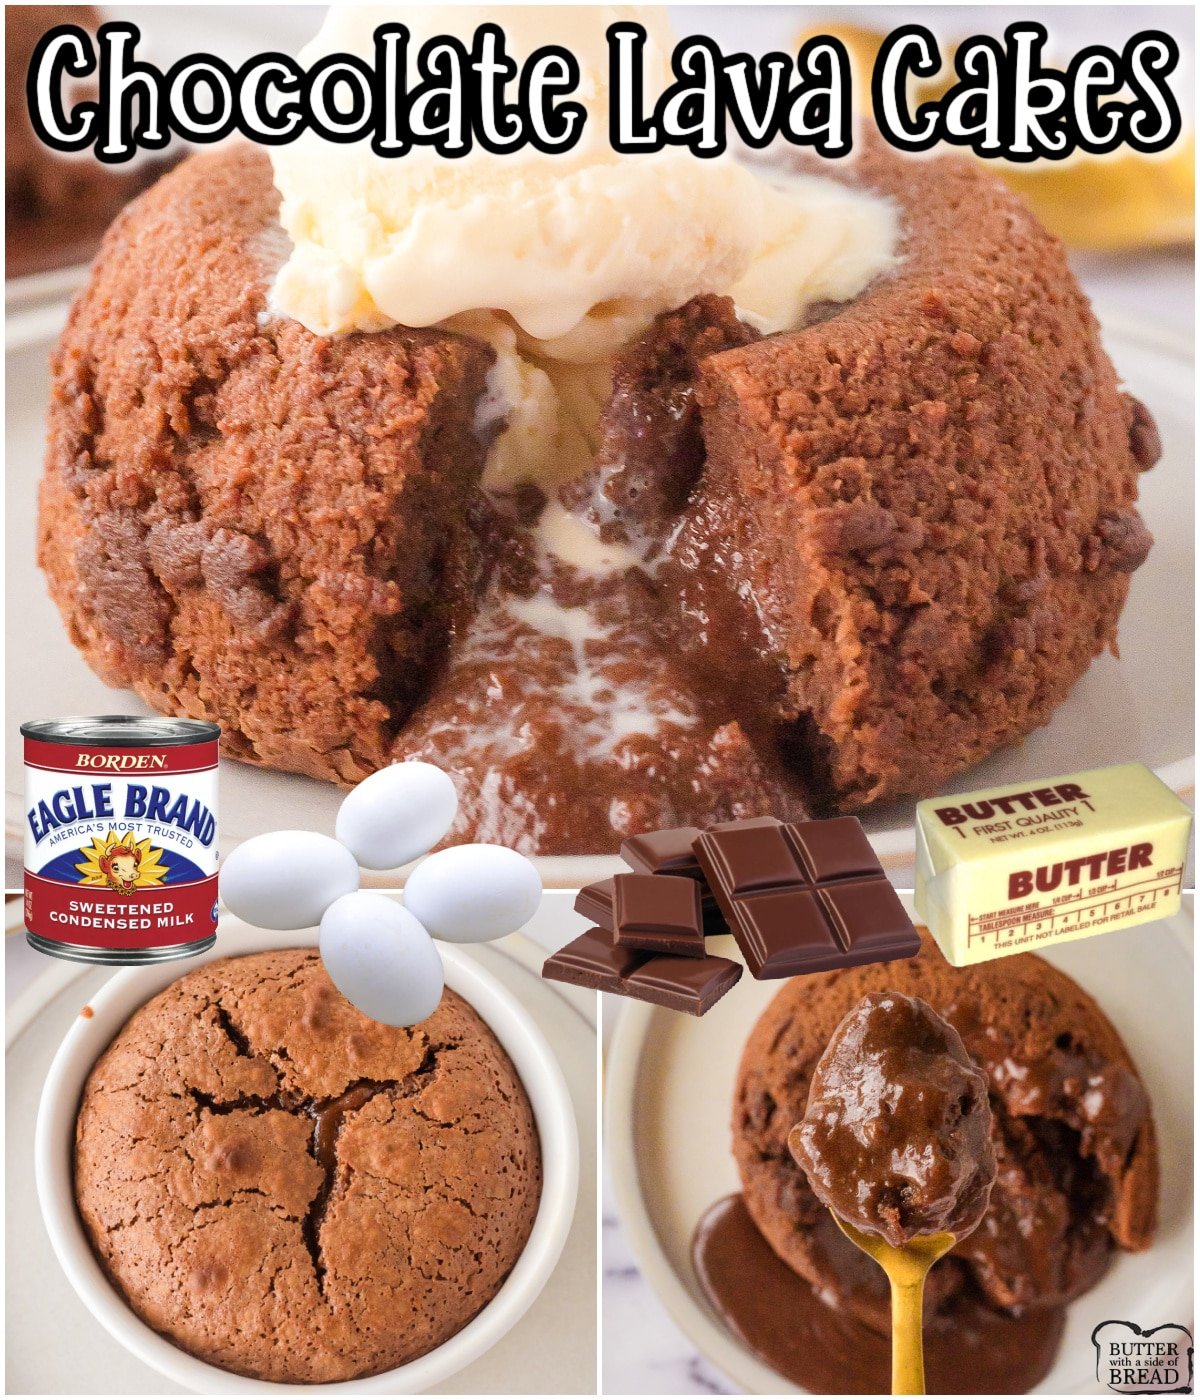 Chocolate Lava Cakes are decadent molten chocolate cakes that are known for their rich, gooey centers that spill out when cut into! This chocolate lava cake recipe comes together easily & uses classic ingredients such as butter, chocolate, eggs, sugar, and flour. 